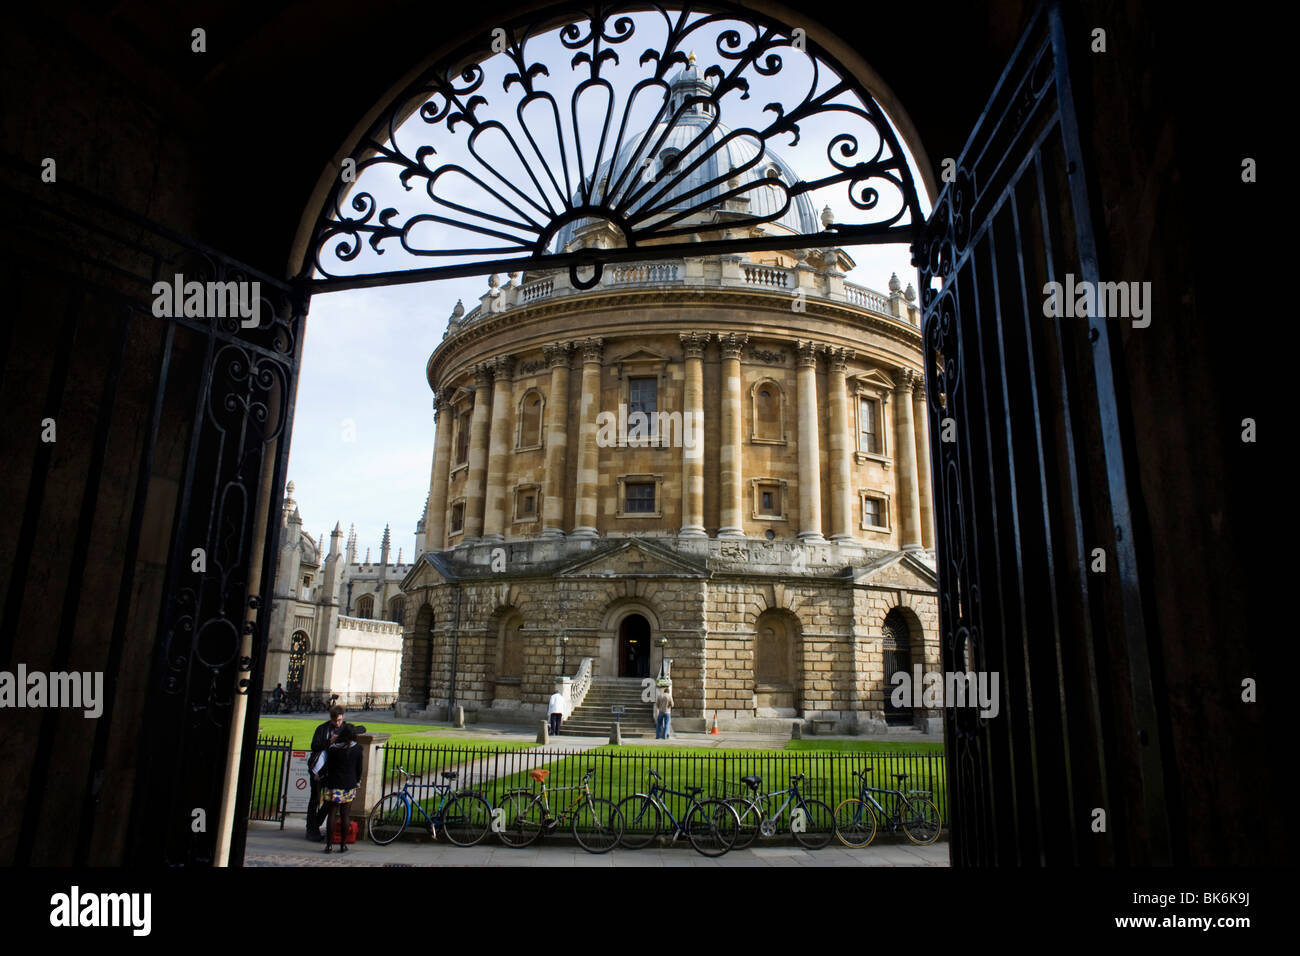 Through Oxford University's Bodleian Library arch, Radcliffe Camera is 150 feet (46 meters) above cobbled Radcliffe Square. Stock Photo